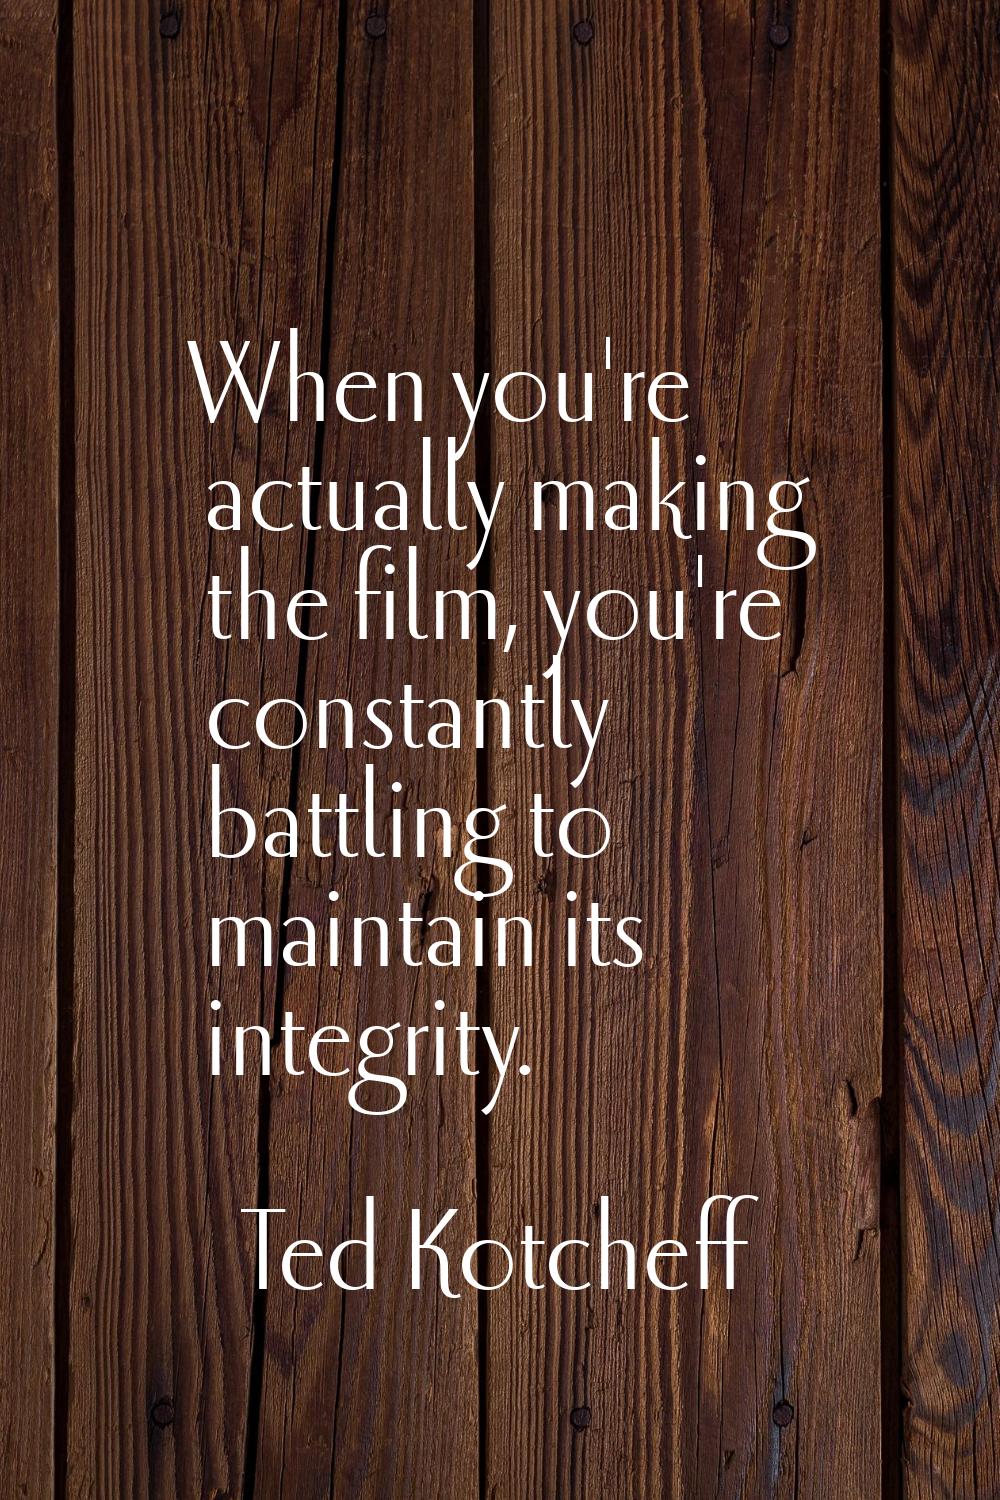 When you're actually making the film, you're constantly battling to maintain its integrity.